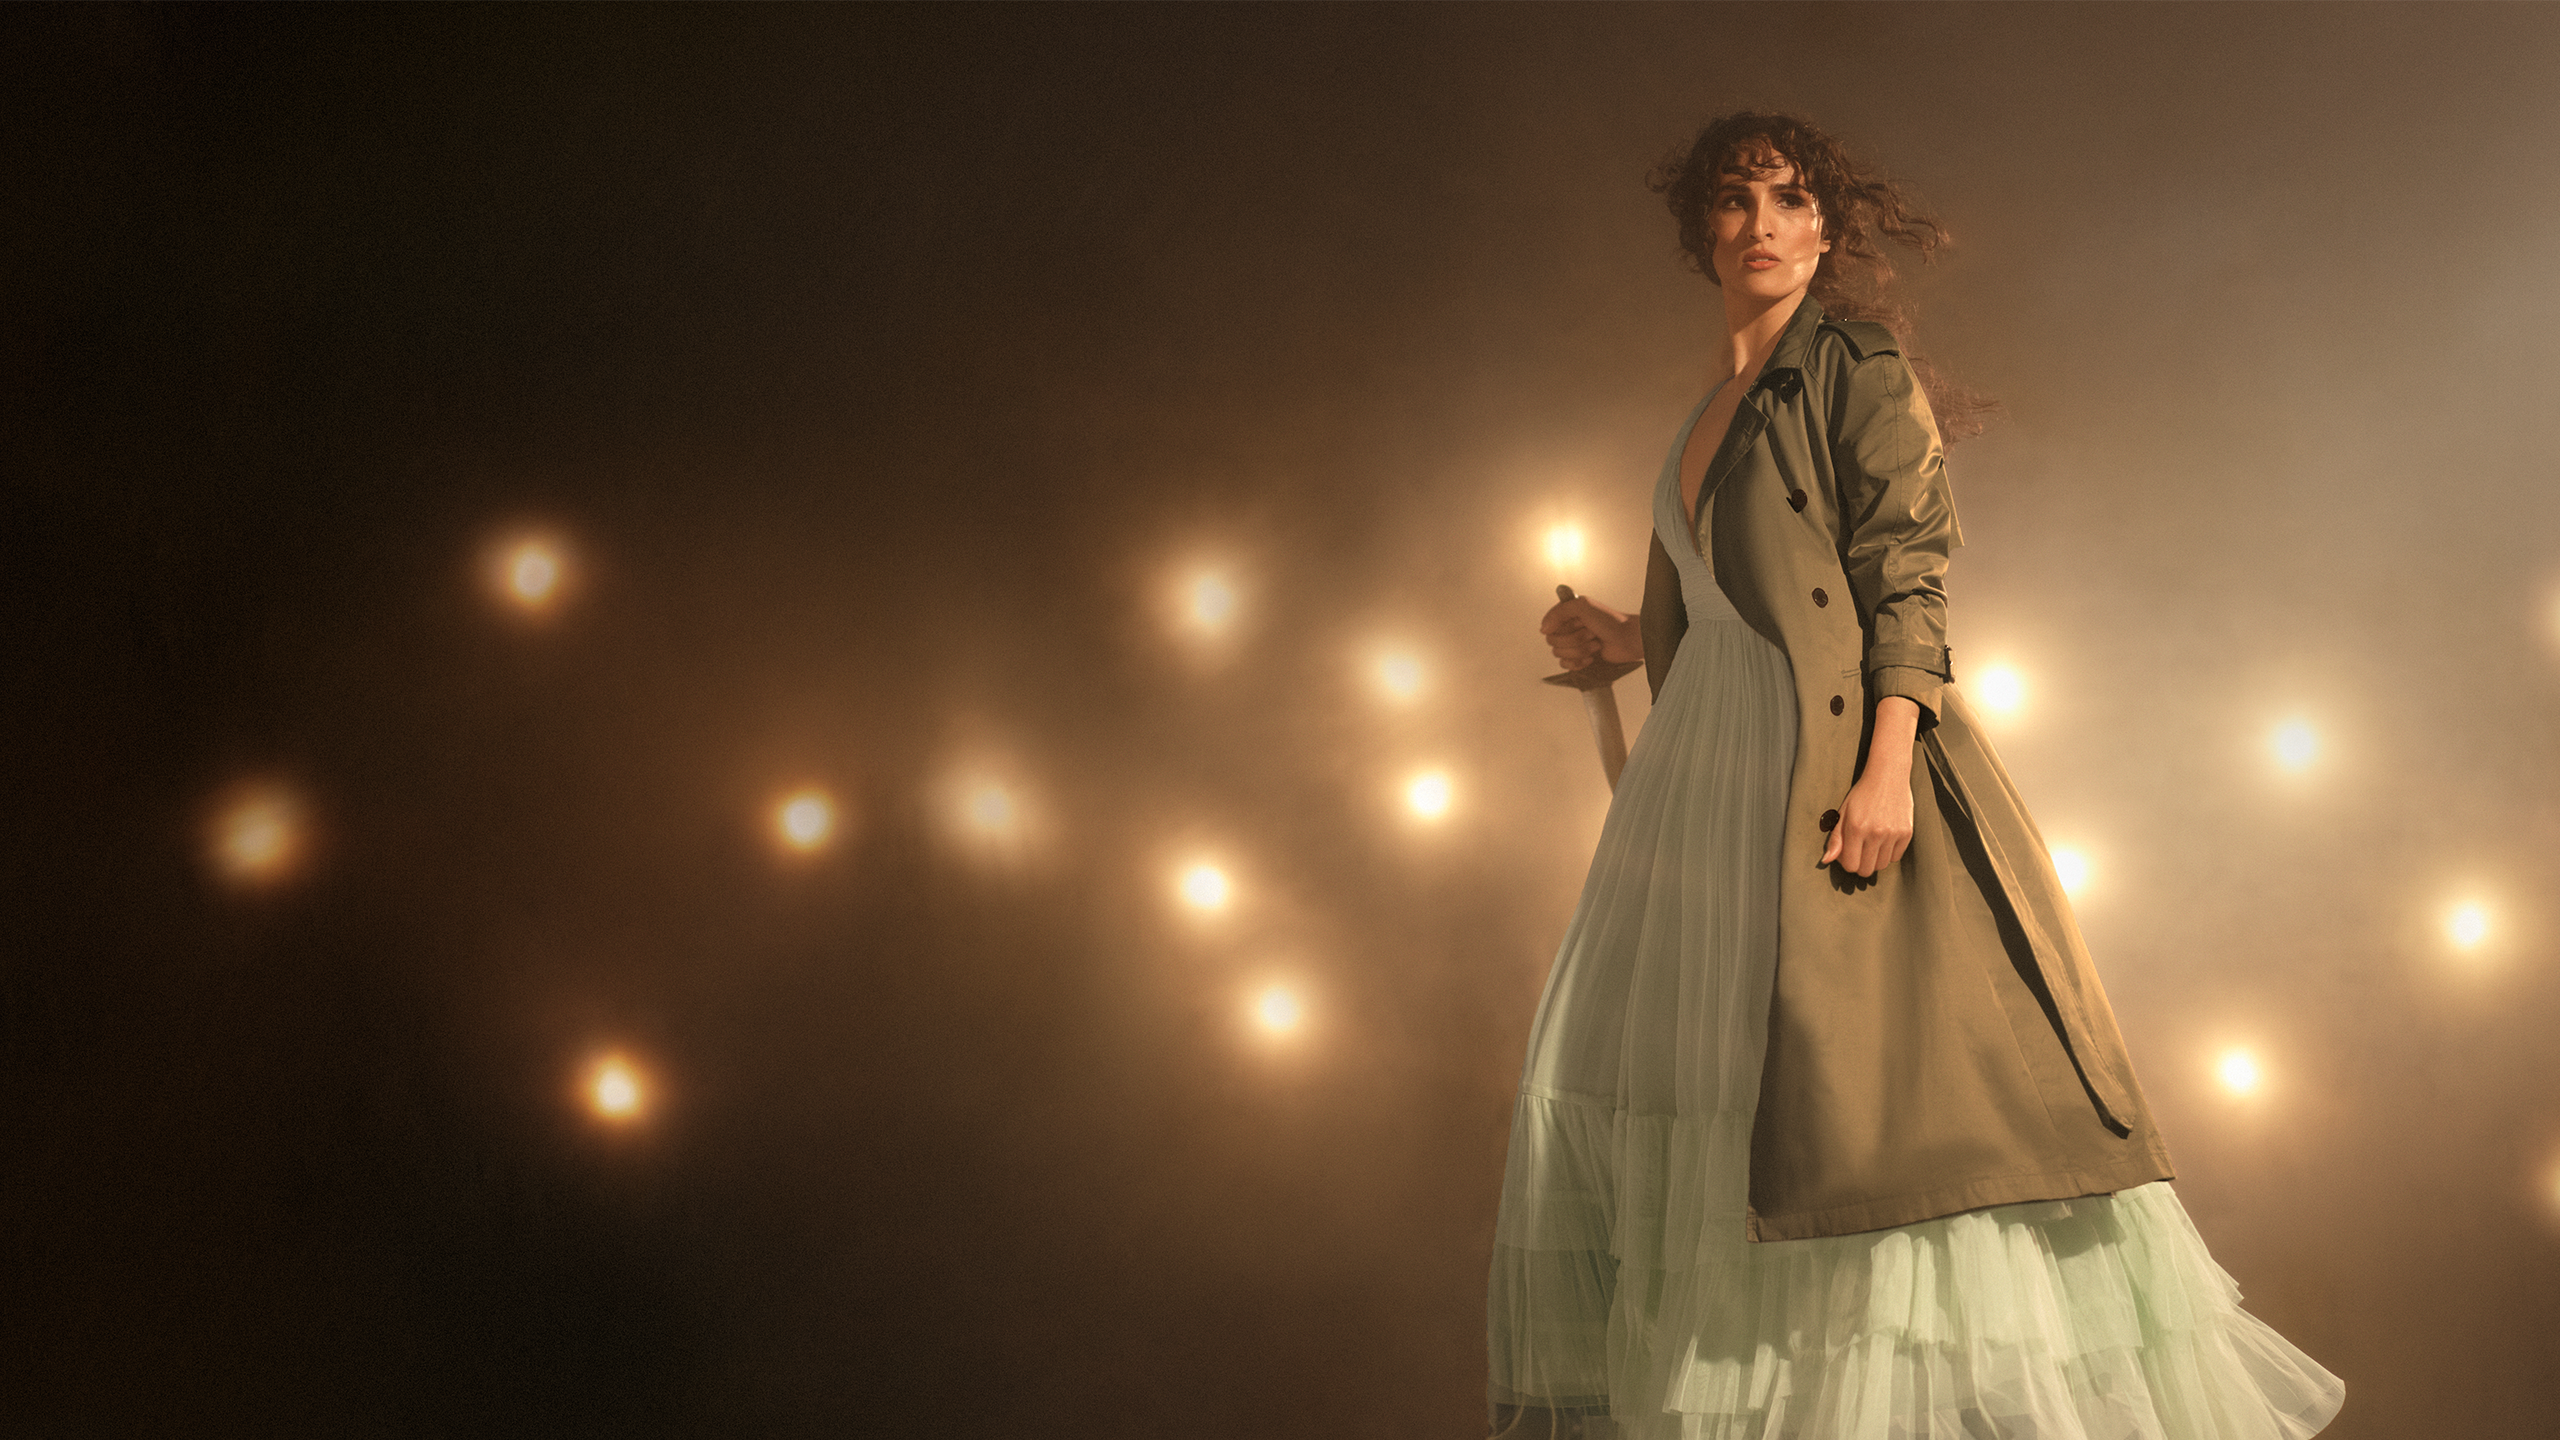 A woman stands in a trench coat, in front of bright spotlights, holding a dagger.